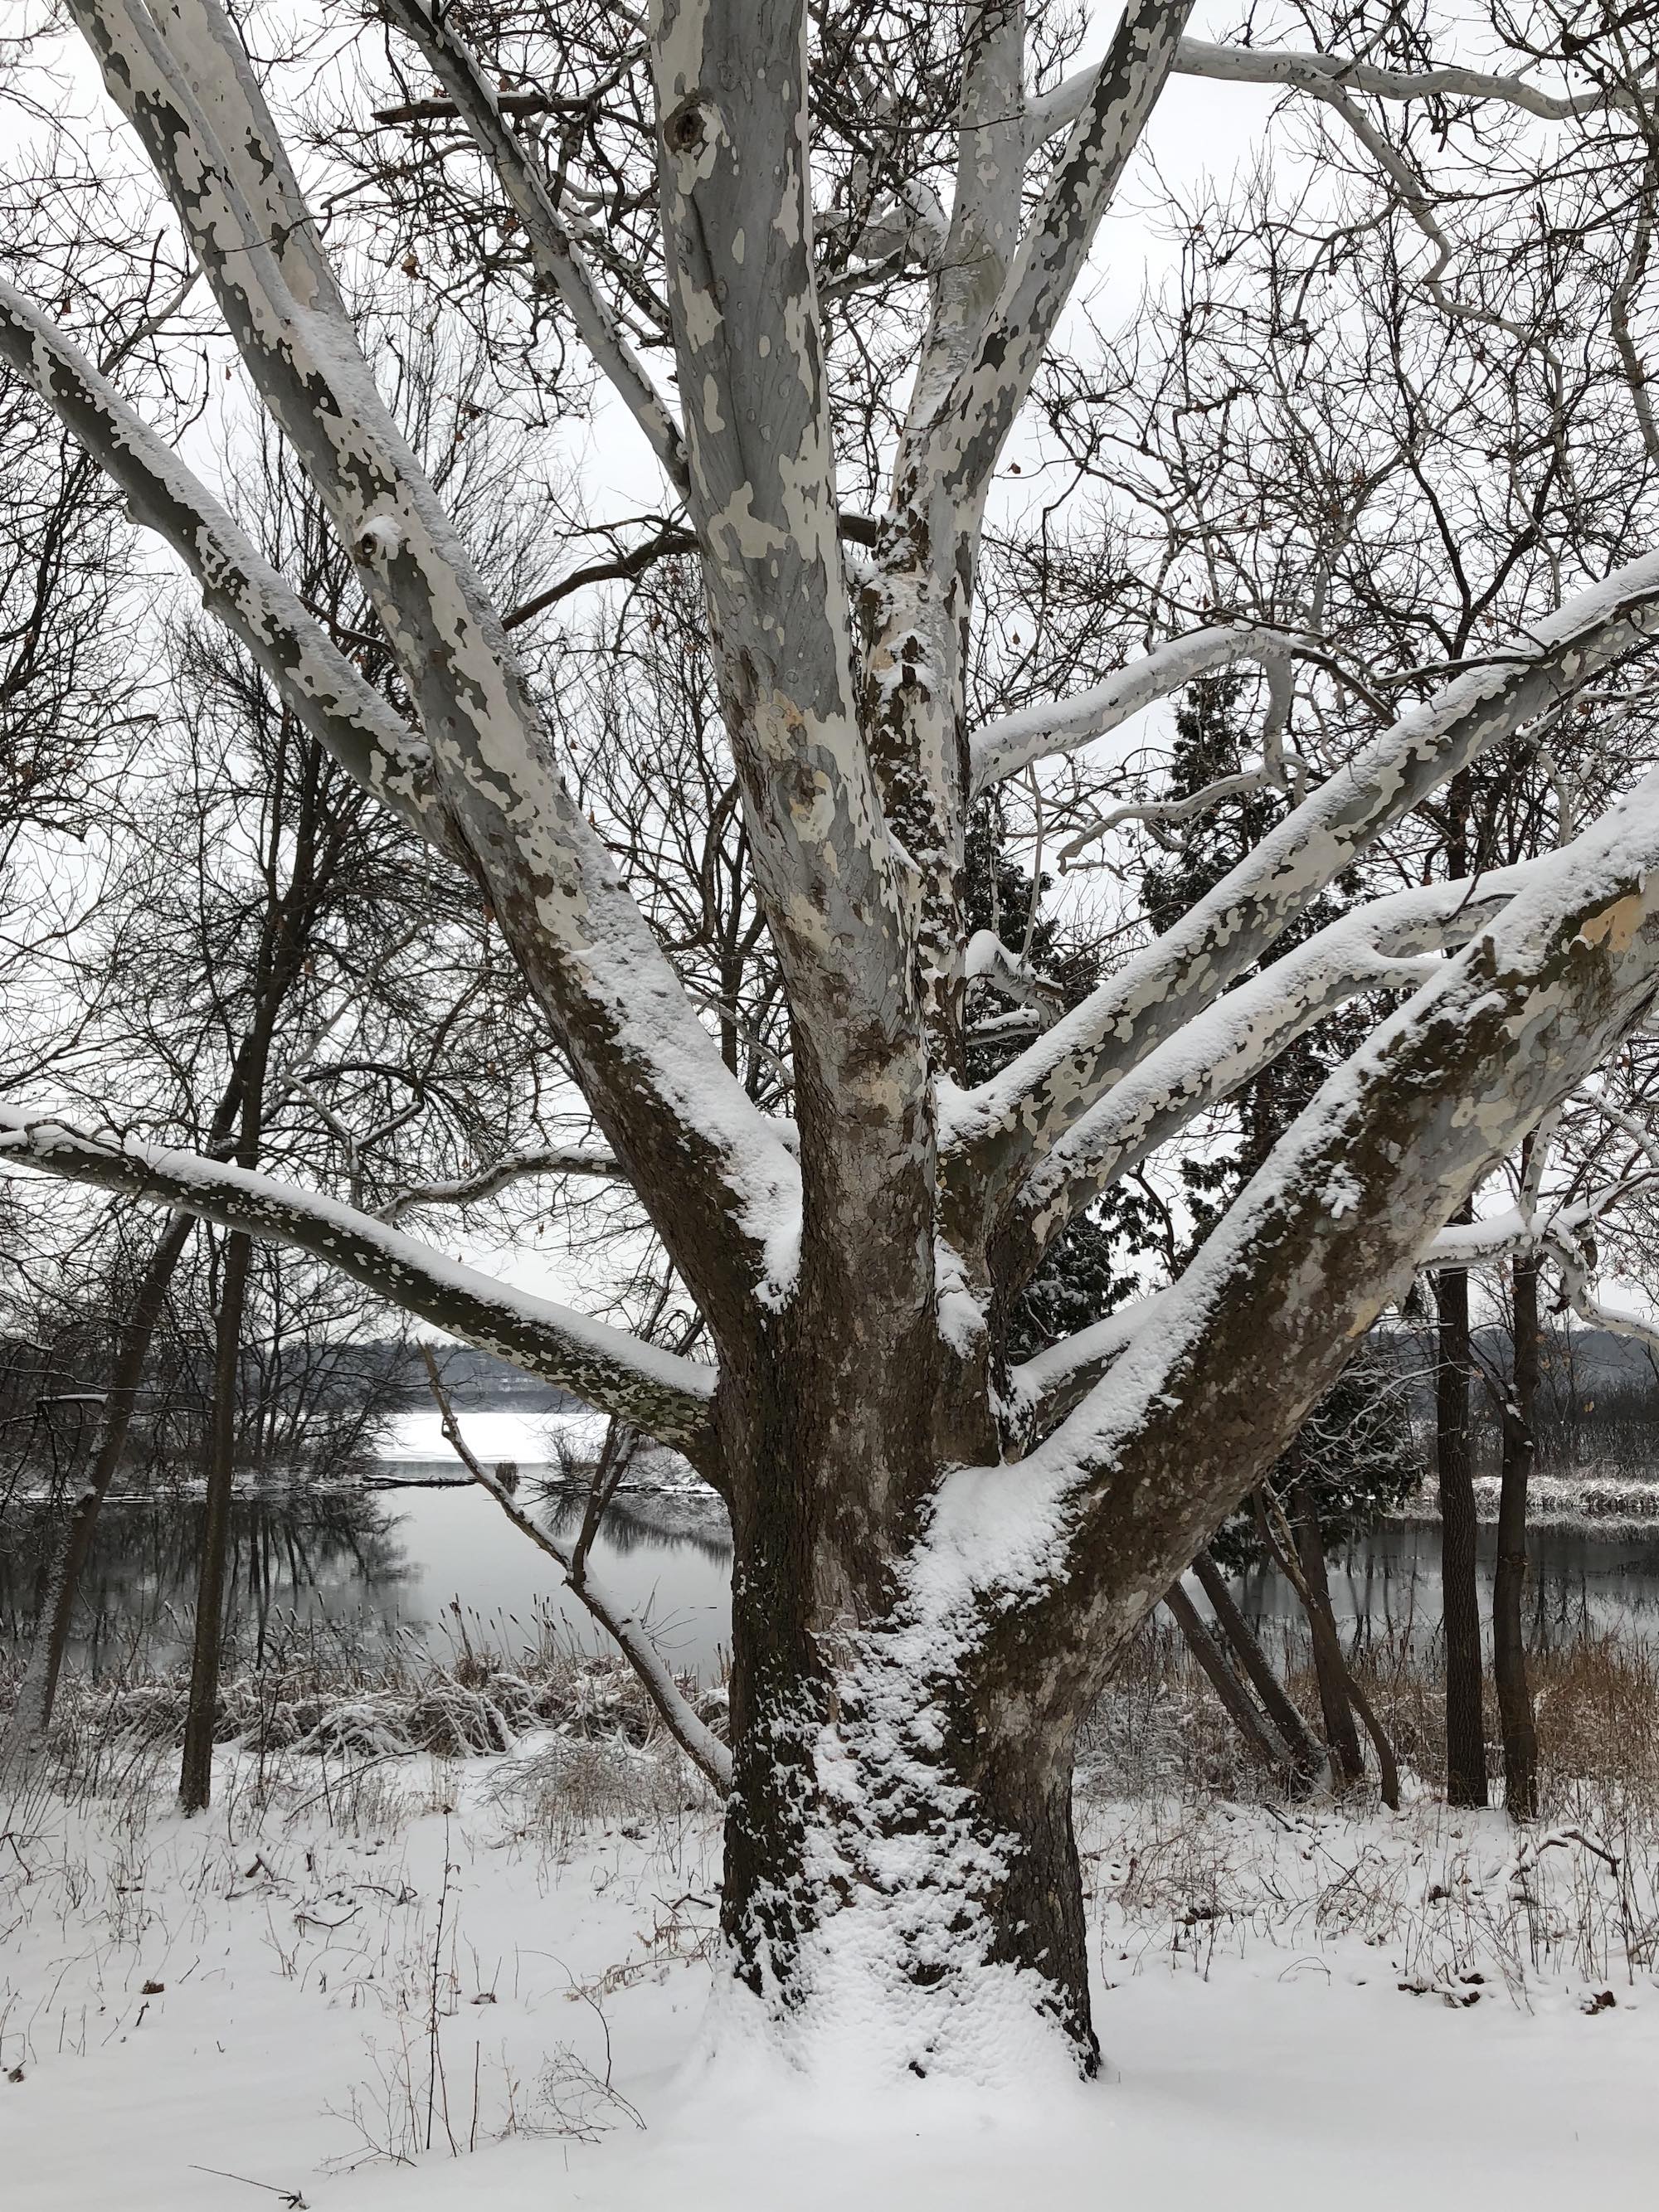 Sycamore tree between Ho-Nee-Um Pond and Arbor Drive on north shore of Lake Wingra on March 6, 2018.